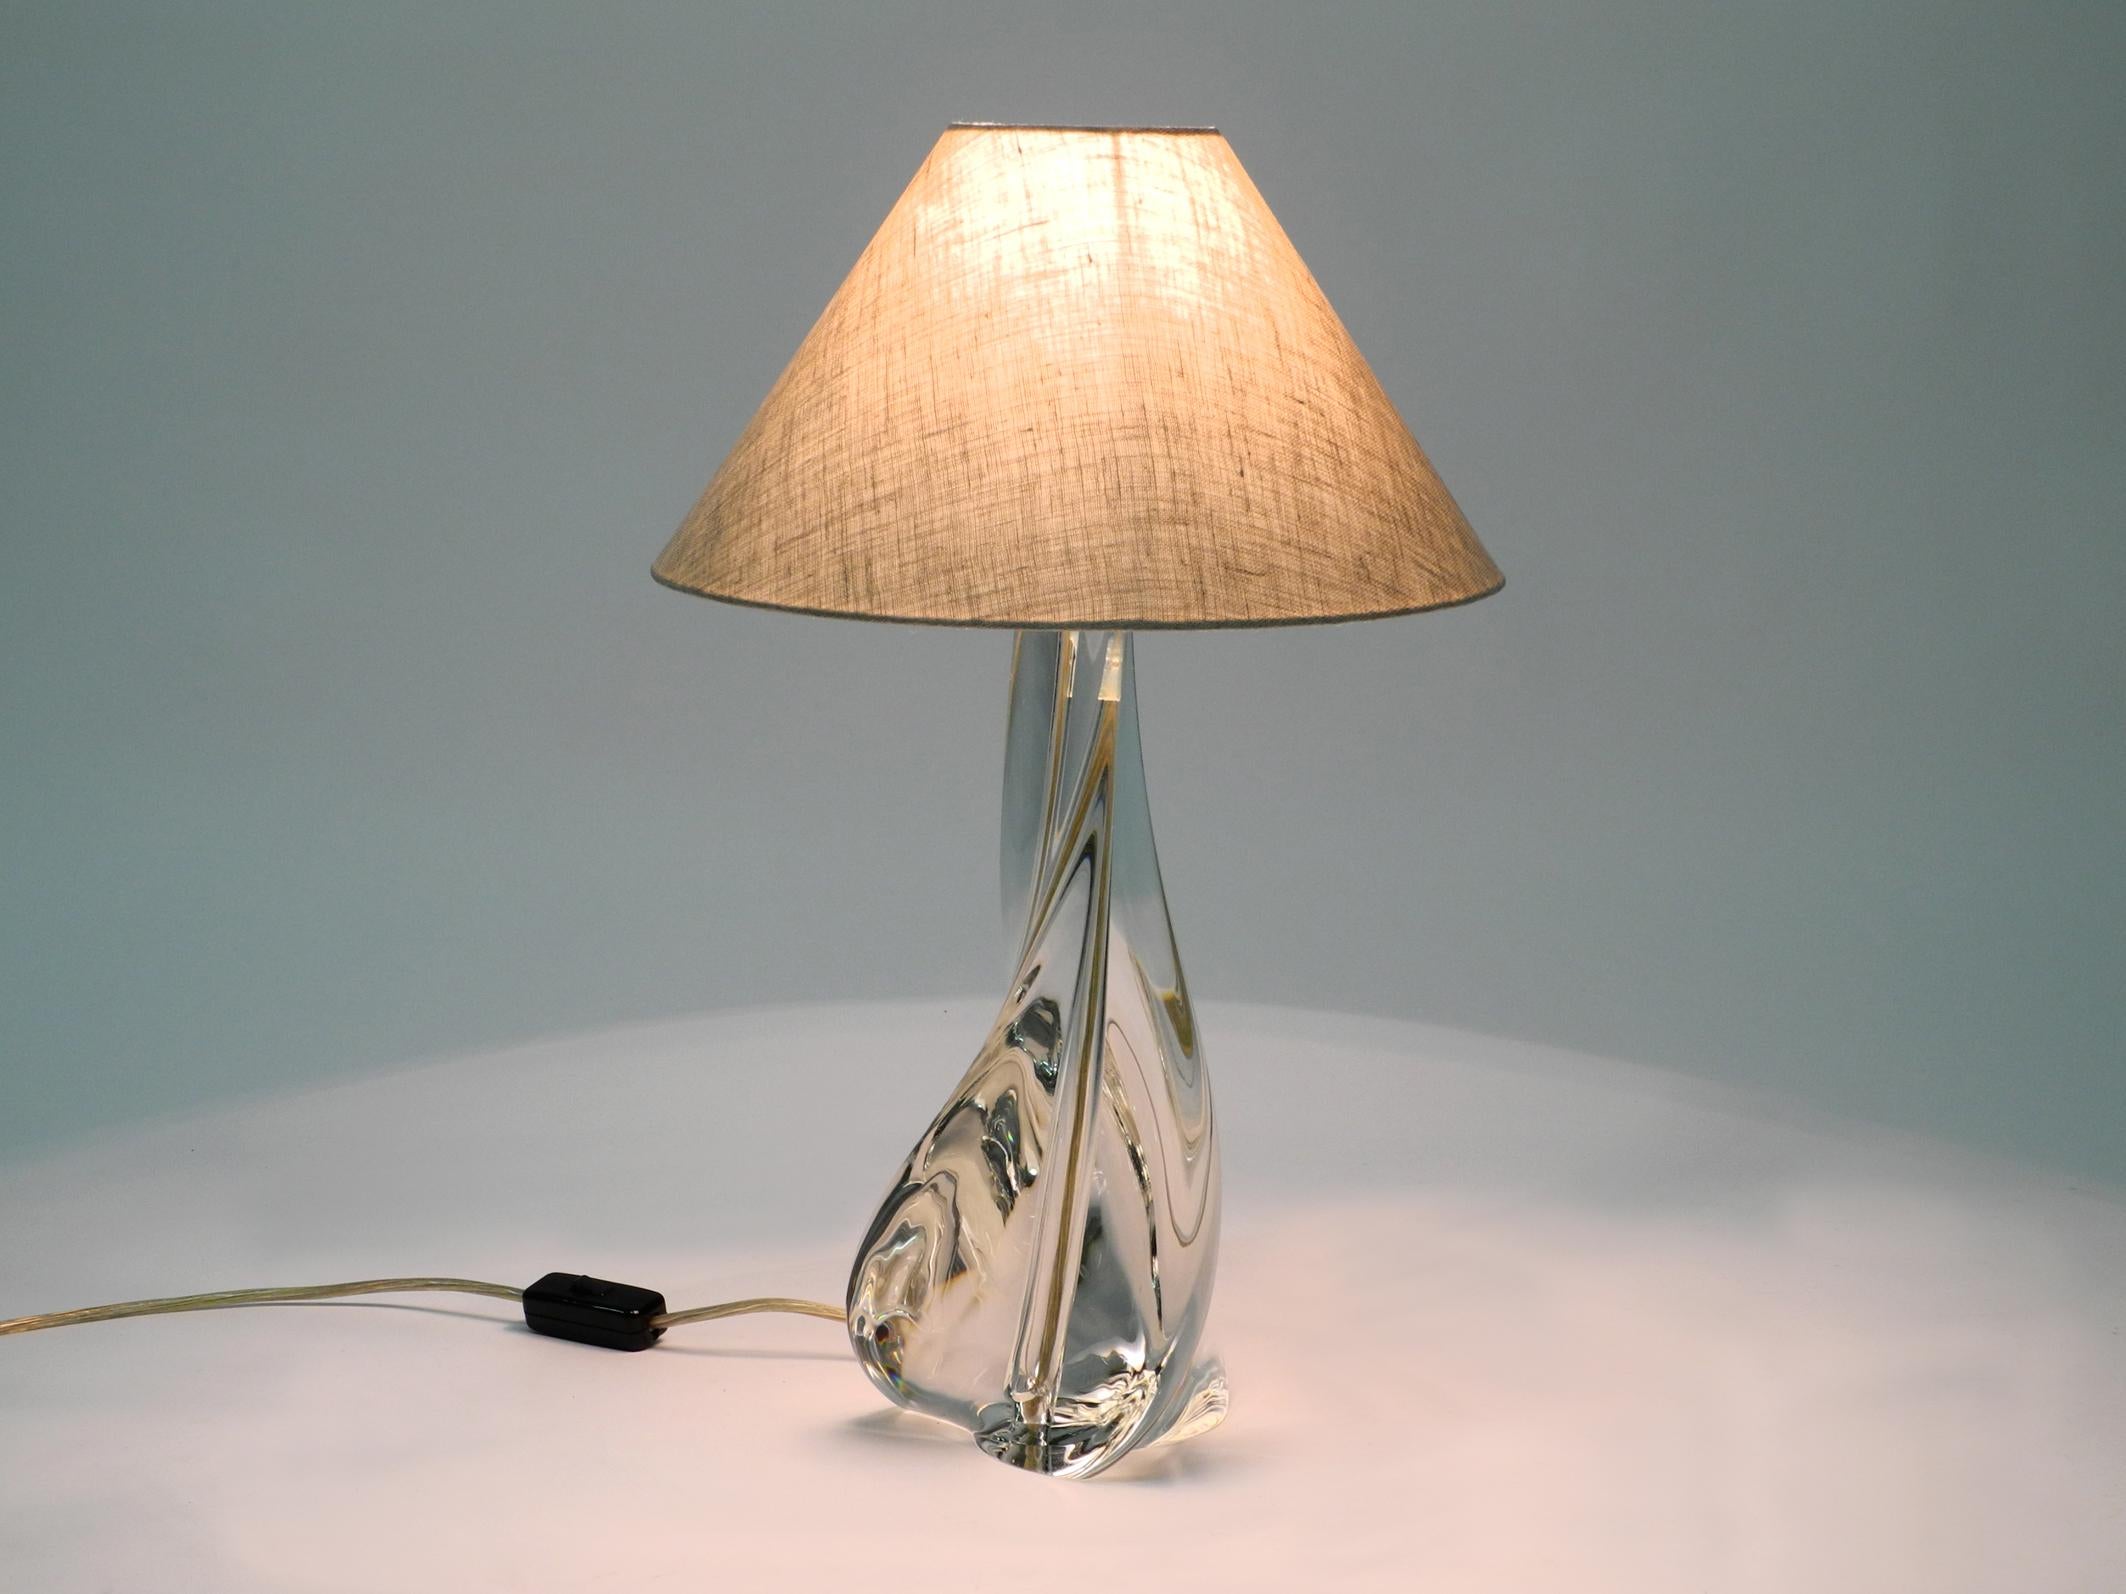 Beautiful large heavy French midcentury table lamp. The lamp base consists of hand blown and twisted solid crystal glass.
Manufacturer is St Louis France. The renowned French glass manufacturer Maison Saint Louis, the oldest art glass manufacturer